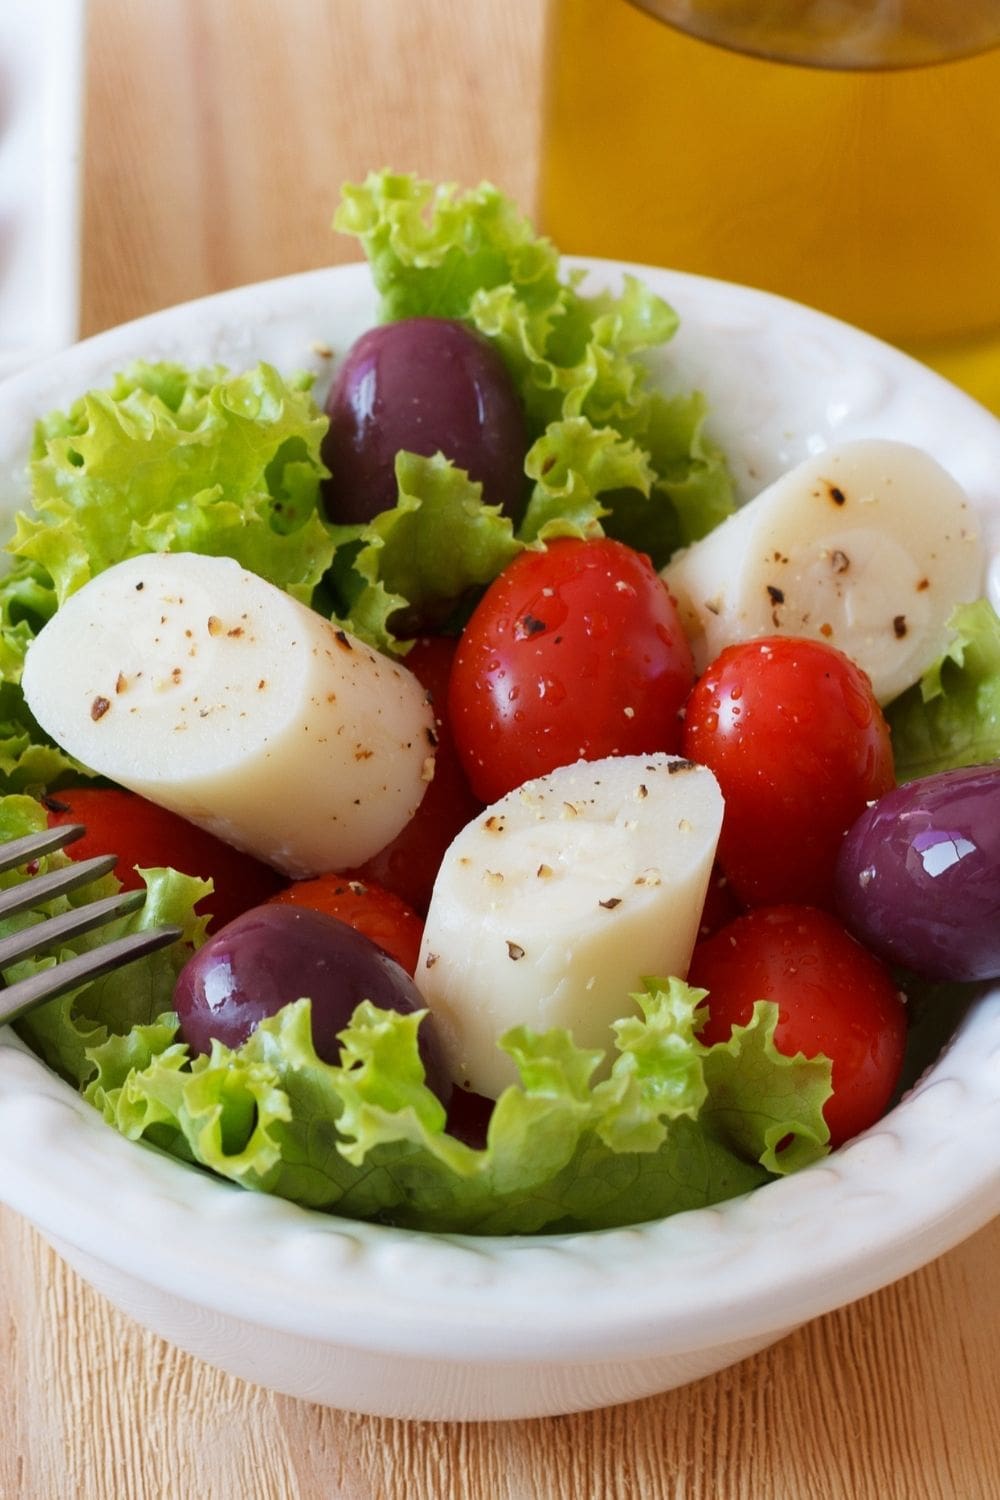 Palm hearts salad with cherry tomatoes and olives